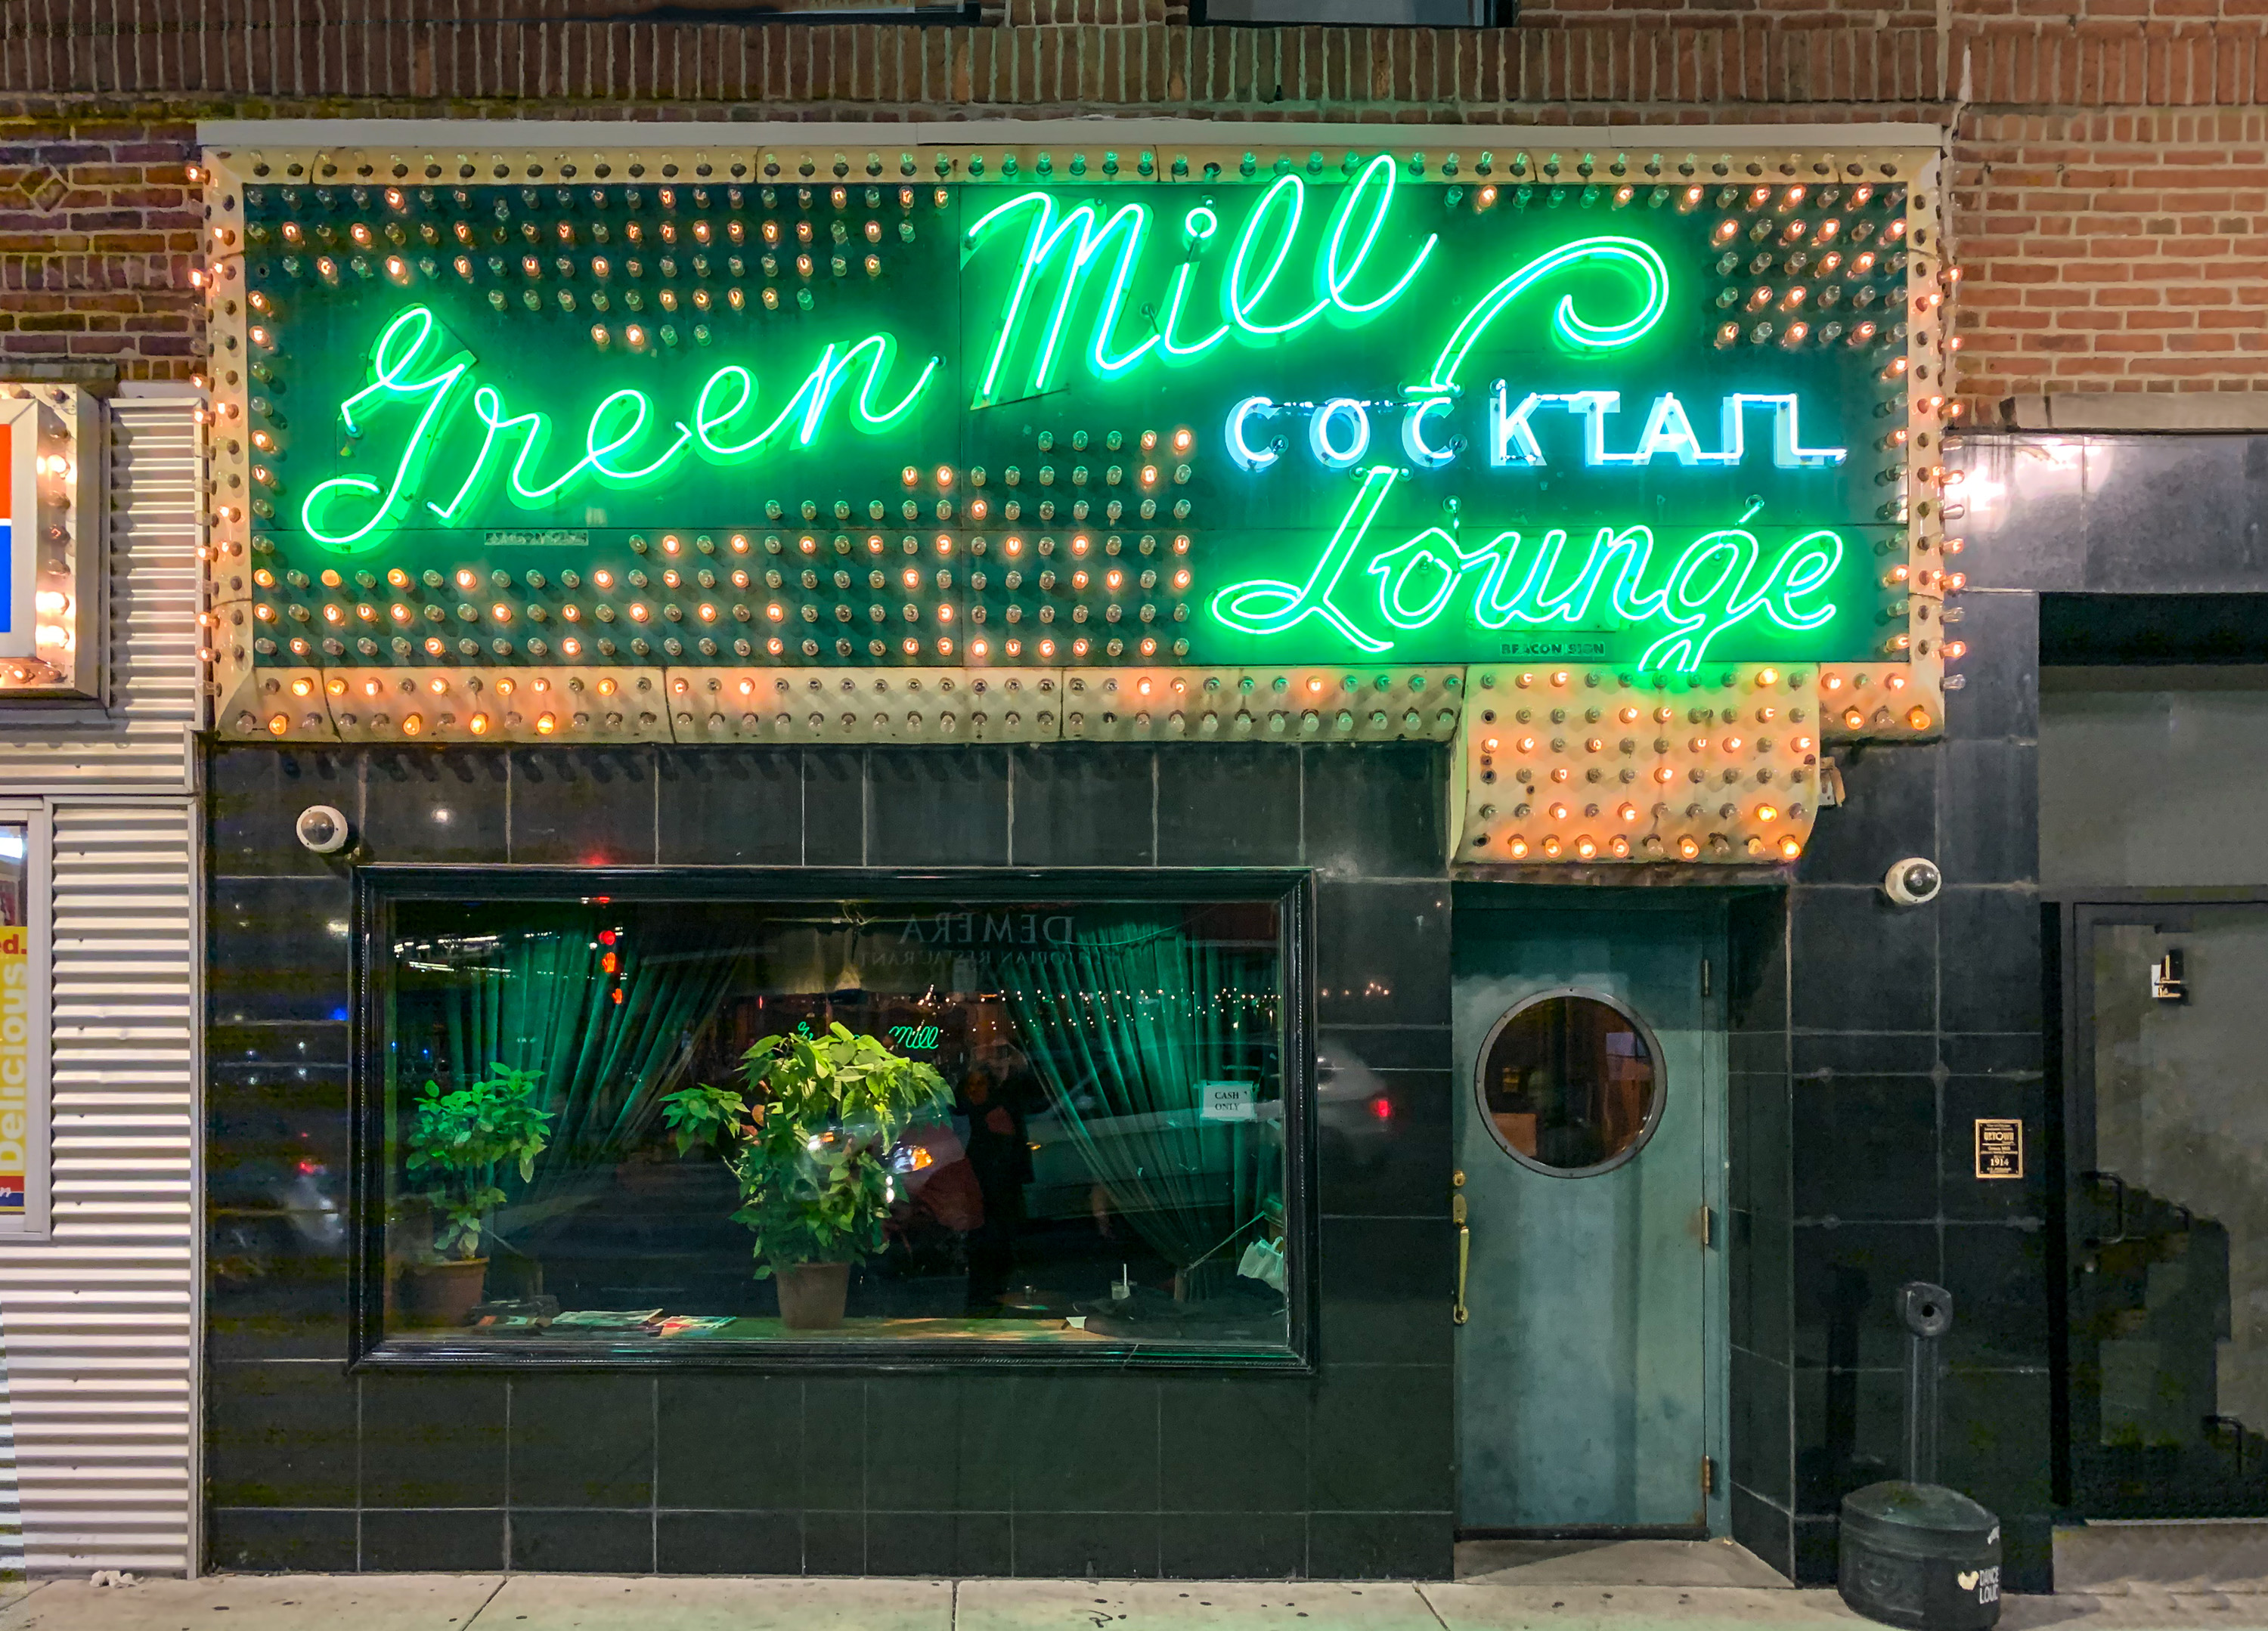 Green Mill Cocktail Lounge - Wikipedia